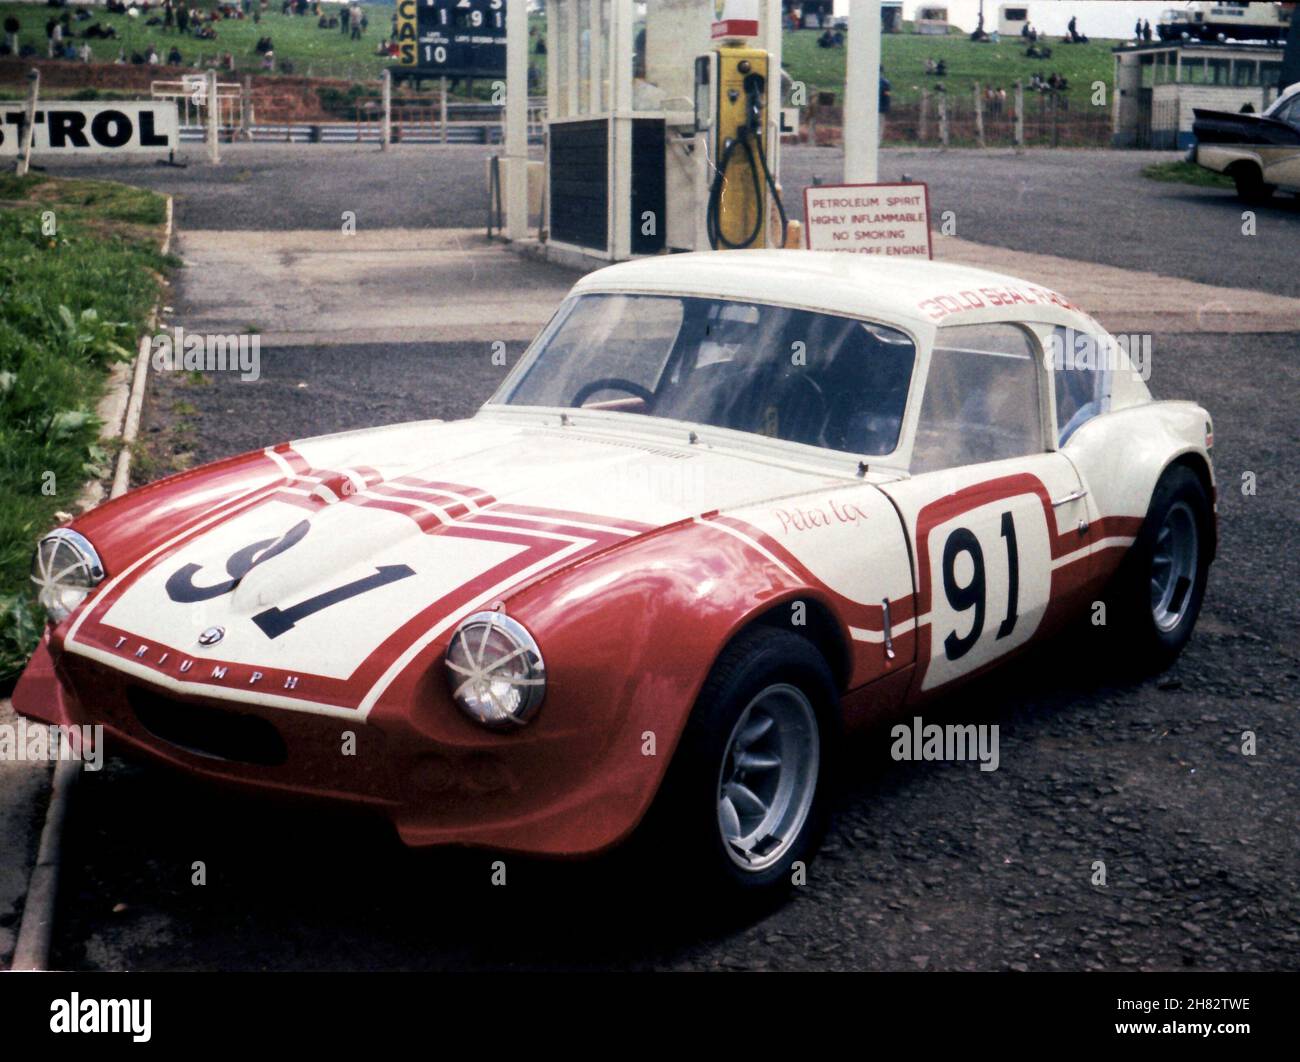 #91 Peter Cox, Triumph GT6, in the paddock at the BRSCC Guards Holiday F5000 meeting at Mallory Park, 25th May 1970. Stock Photo